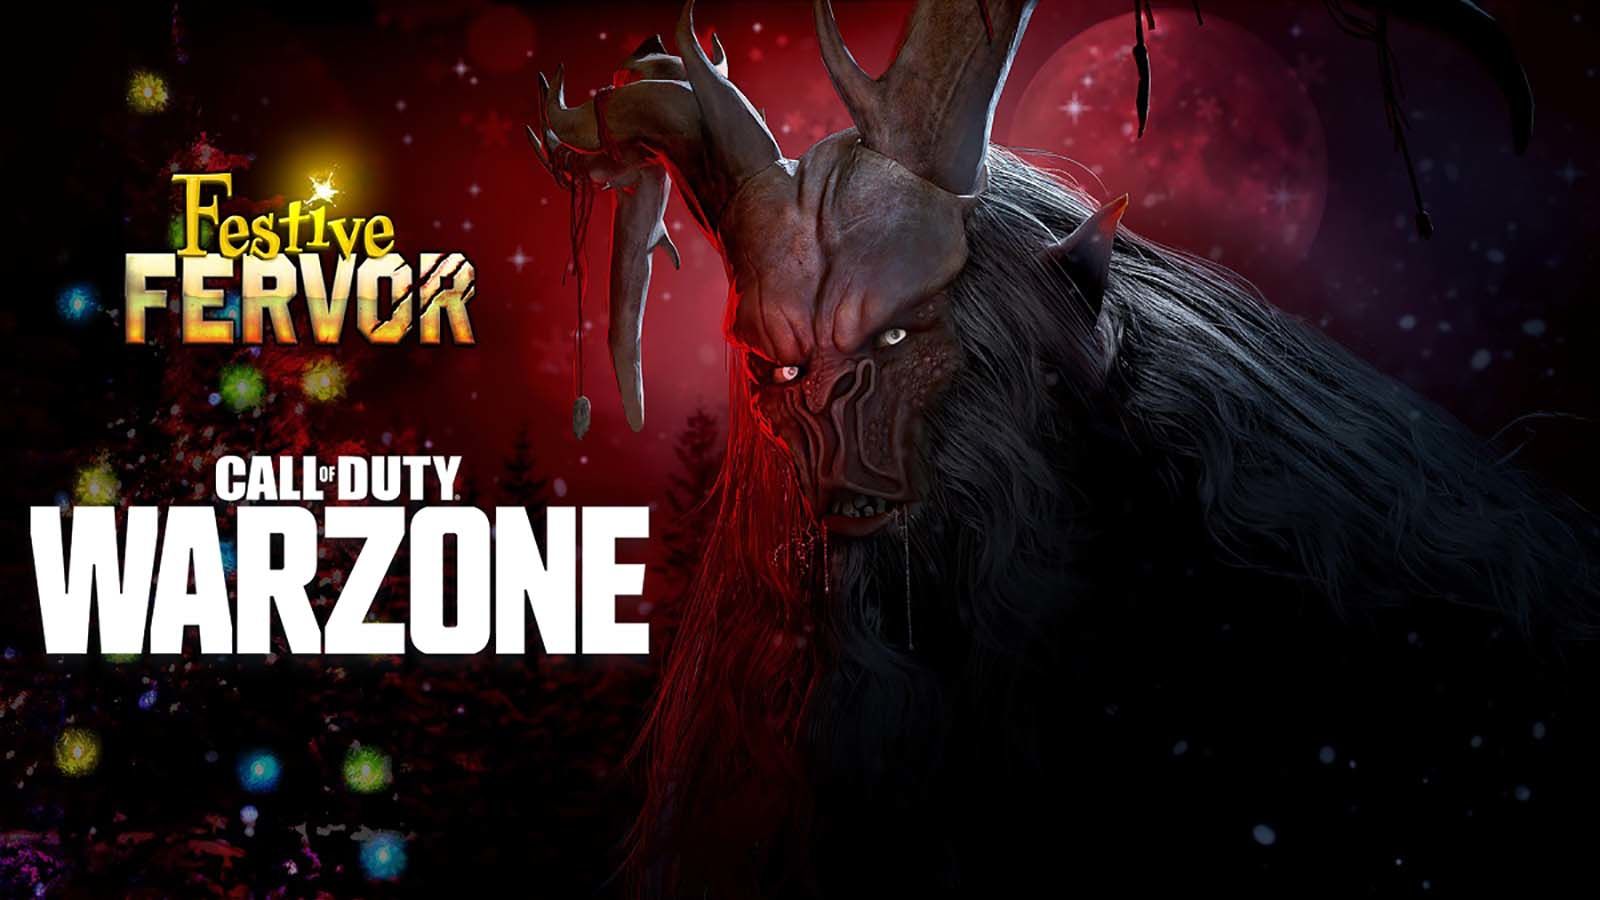 Krampus richtet in Call of Duty Warzone Chaos an